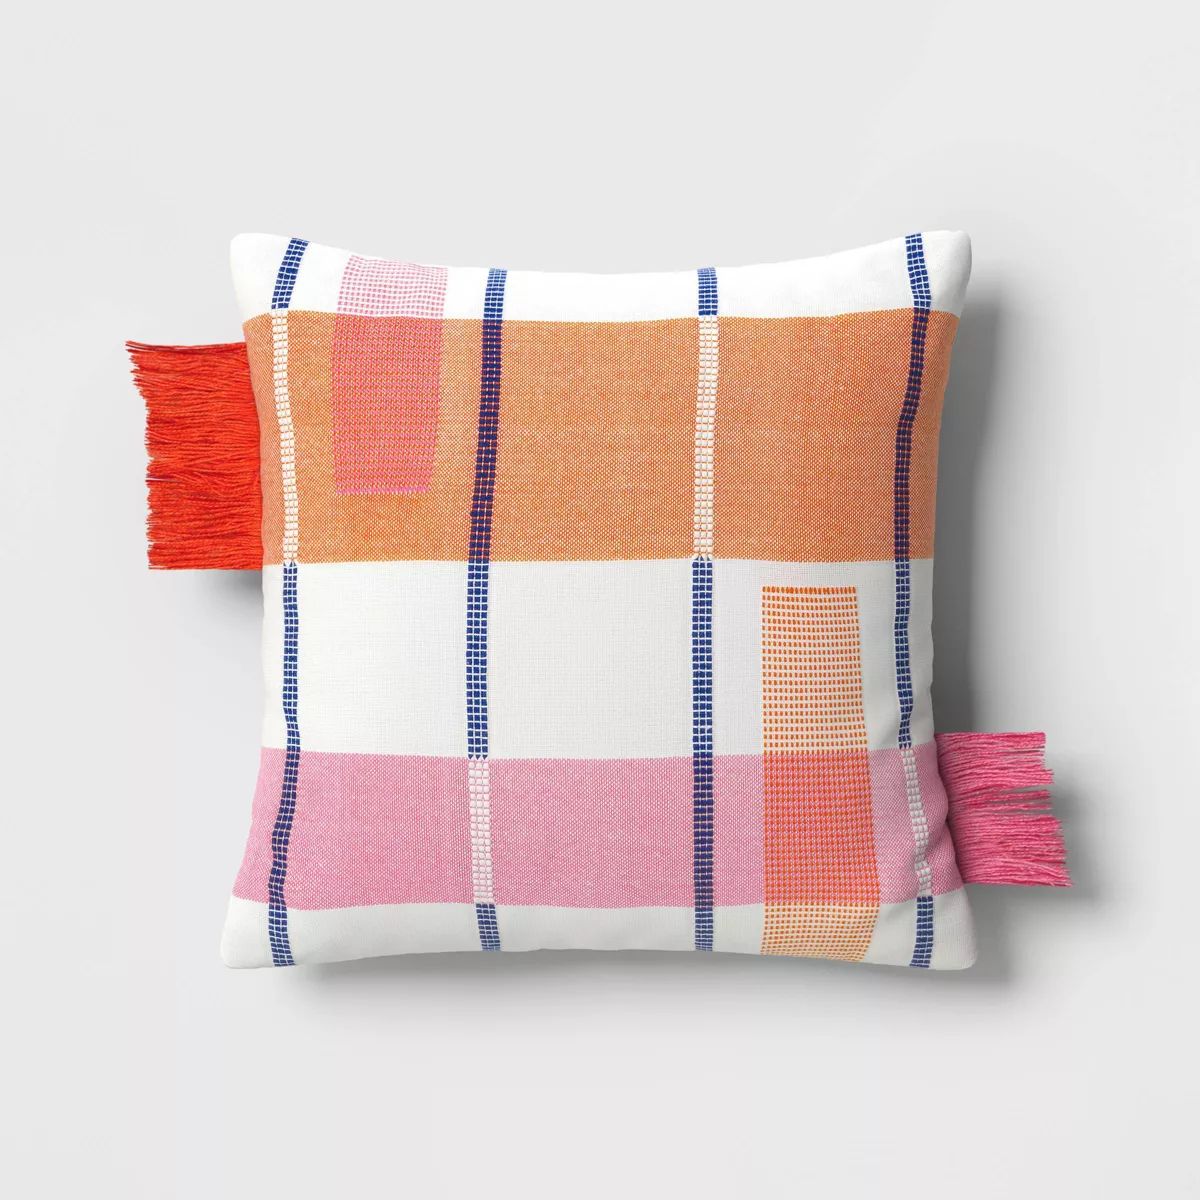 18"x18" Blocks & Stitches Square Outdoor Throw Pillow Multicolor - Threshold™ | Target